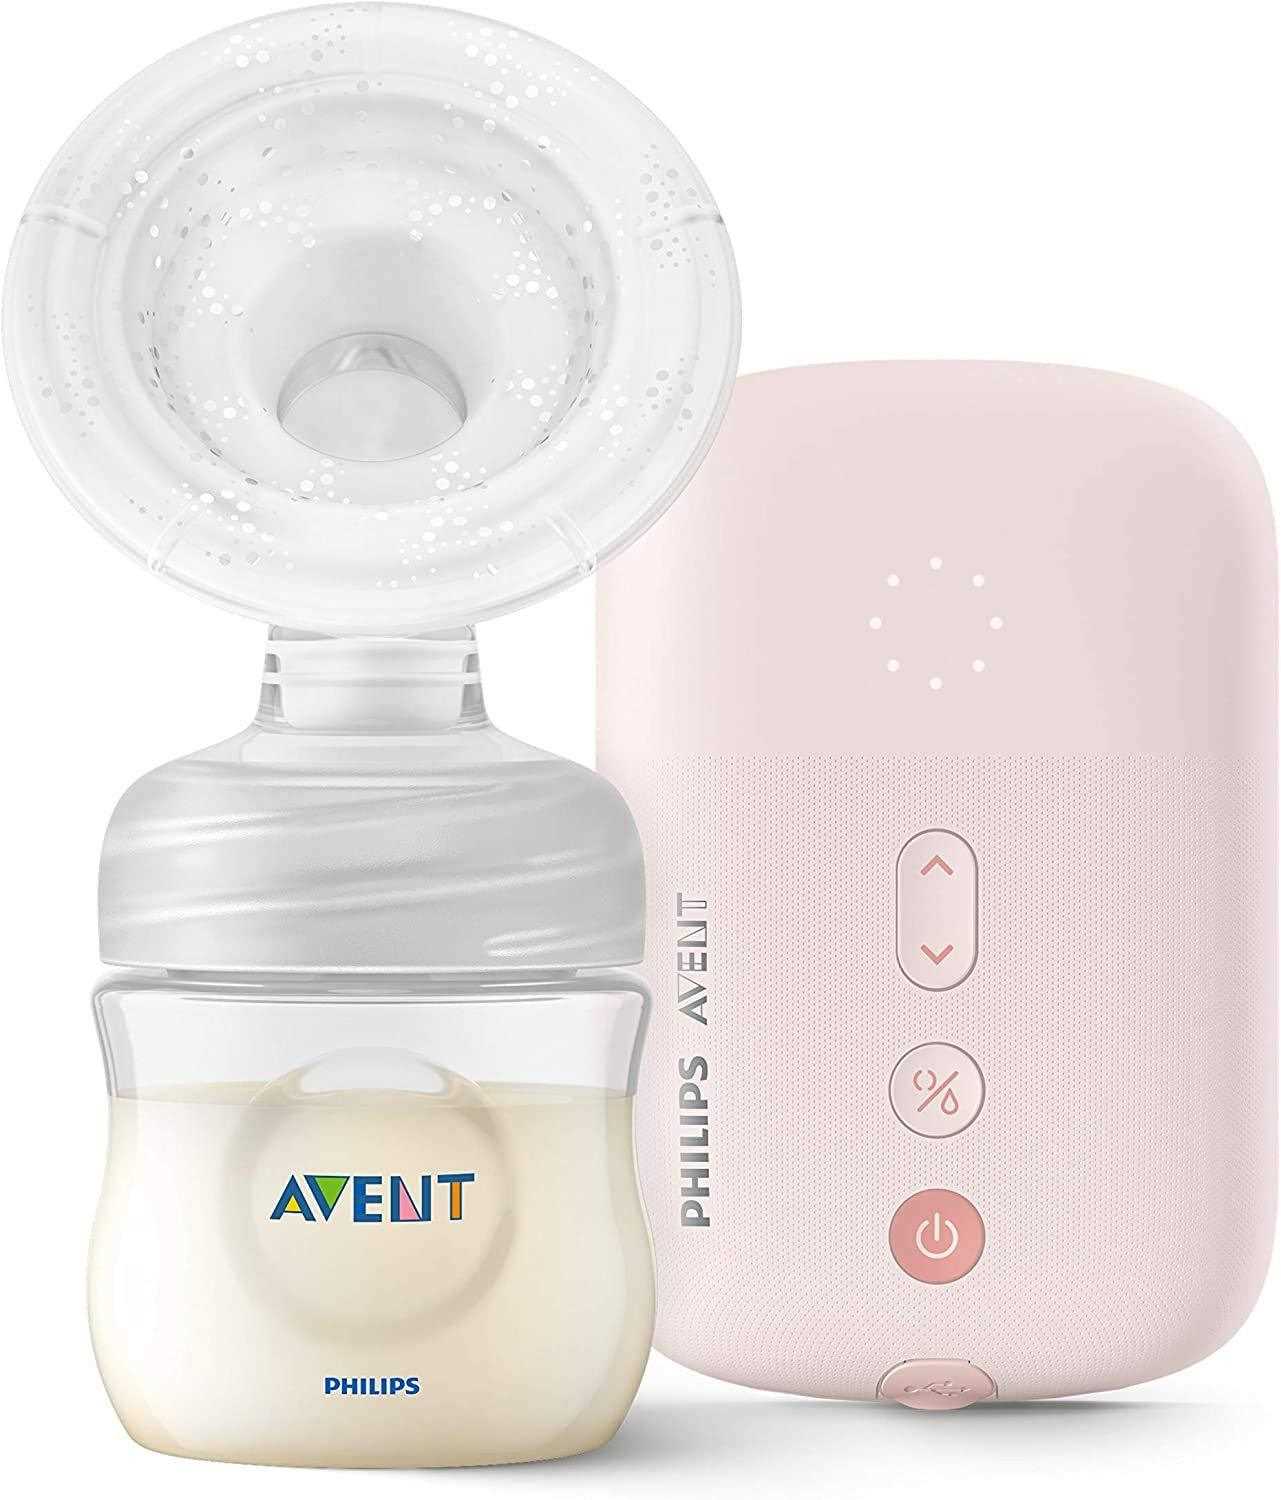 PHILIPS AVENT Single Electric Breast Pump